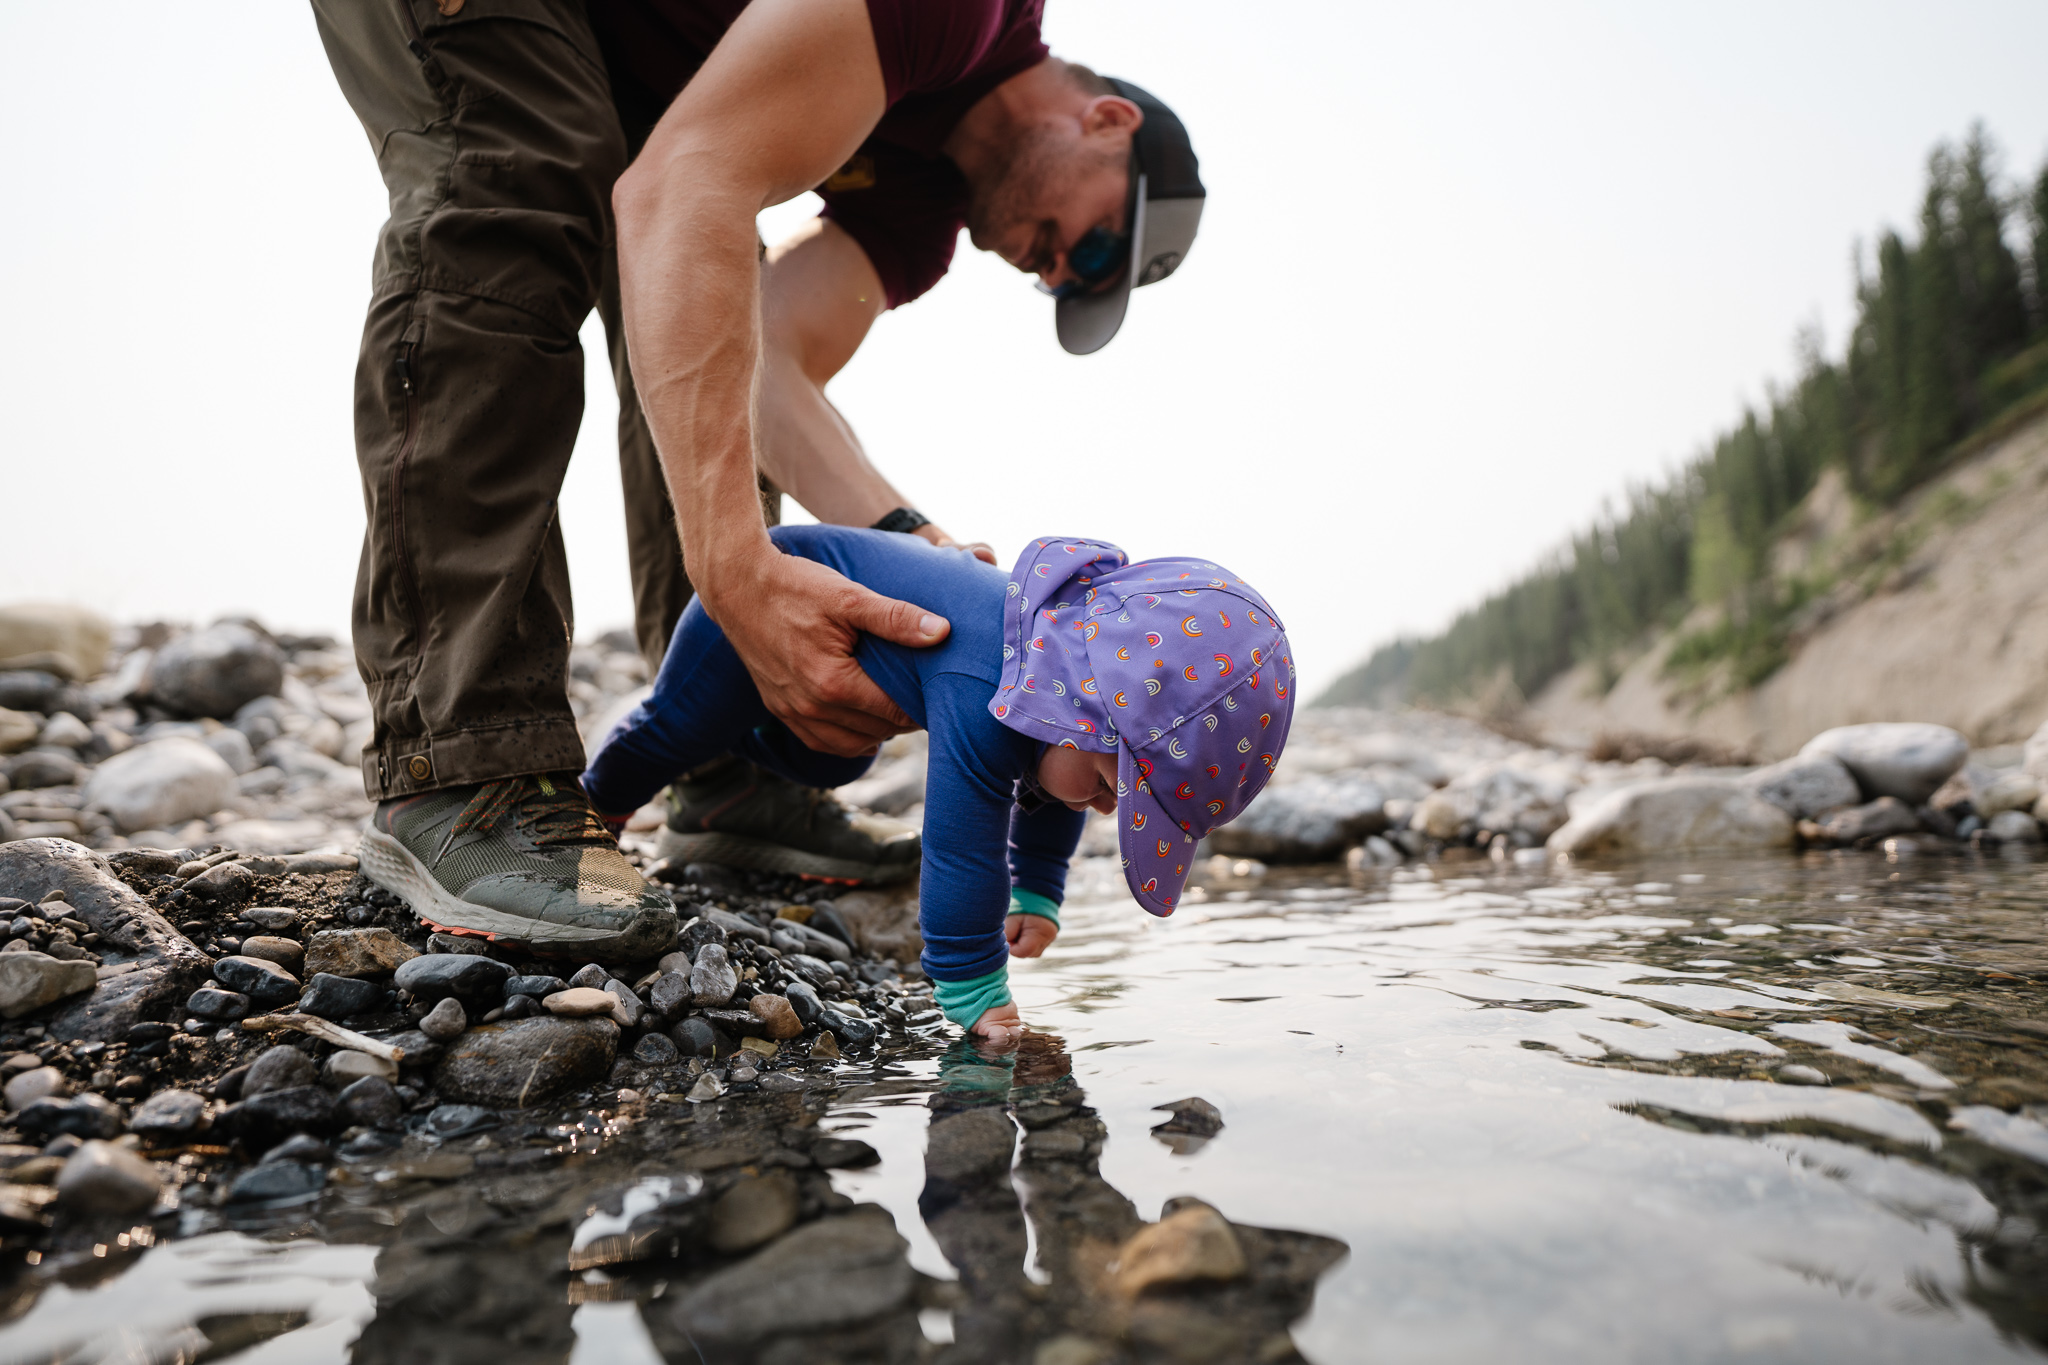 dads holds baby while she reaches into stream to play with rocks while camping